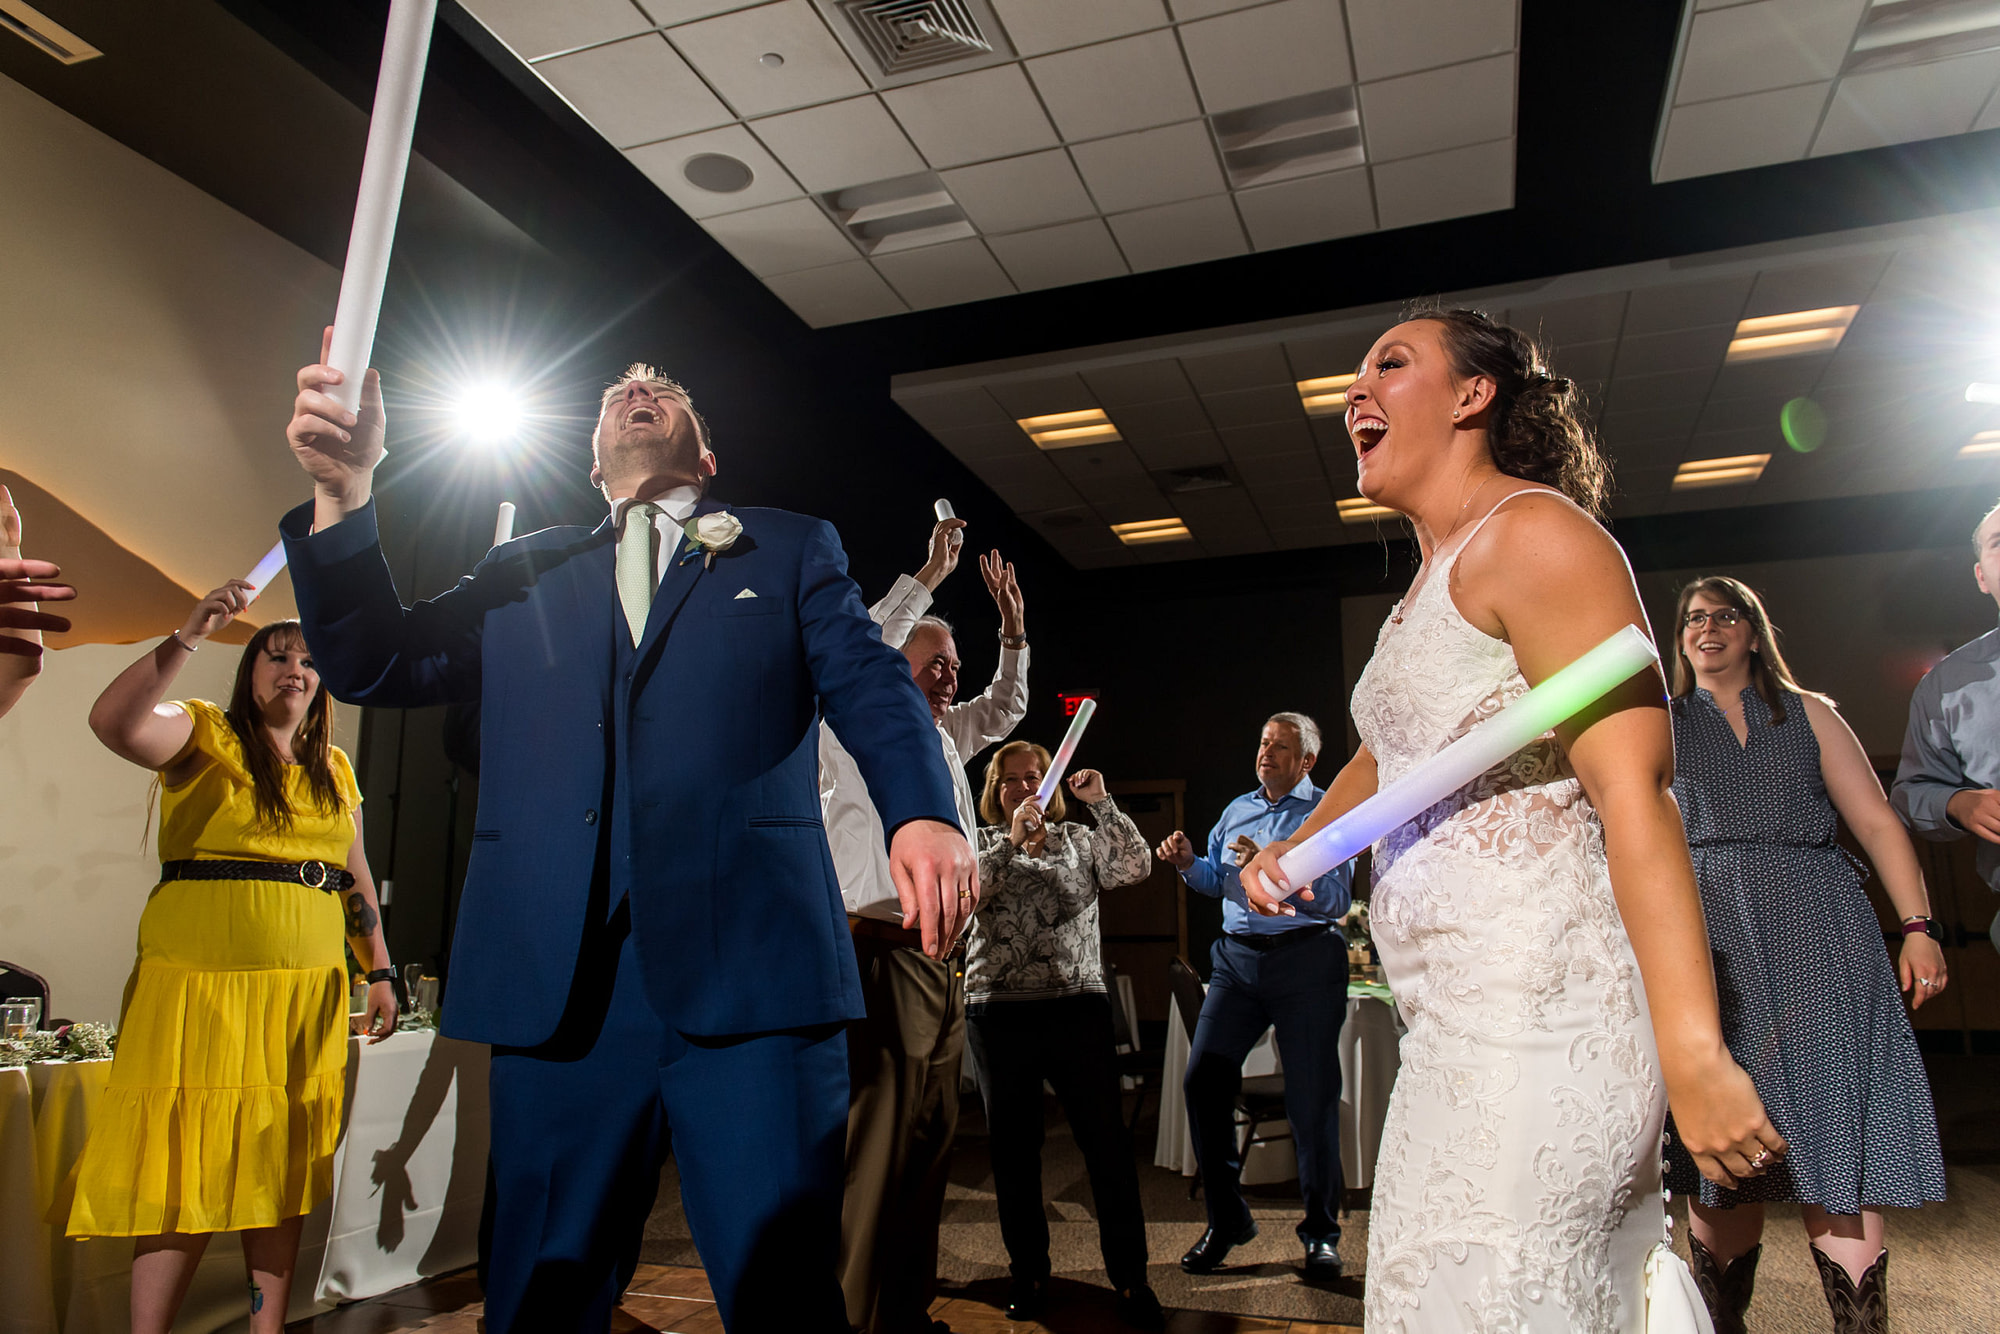 The bride and groom dance during their YMCA of the Rockies wedding in Estes Park, Colorado.